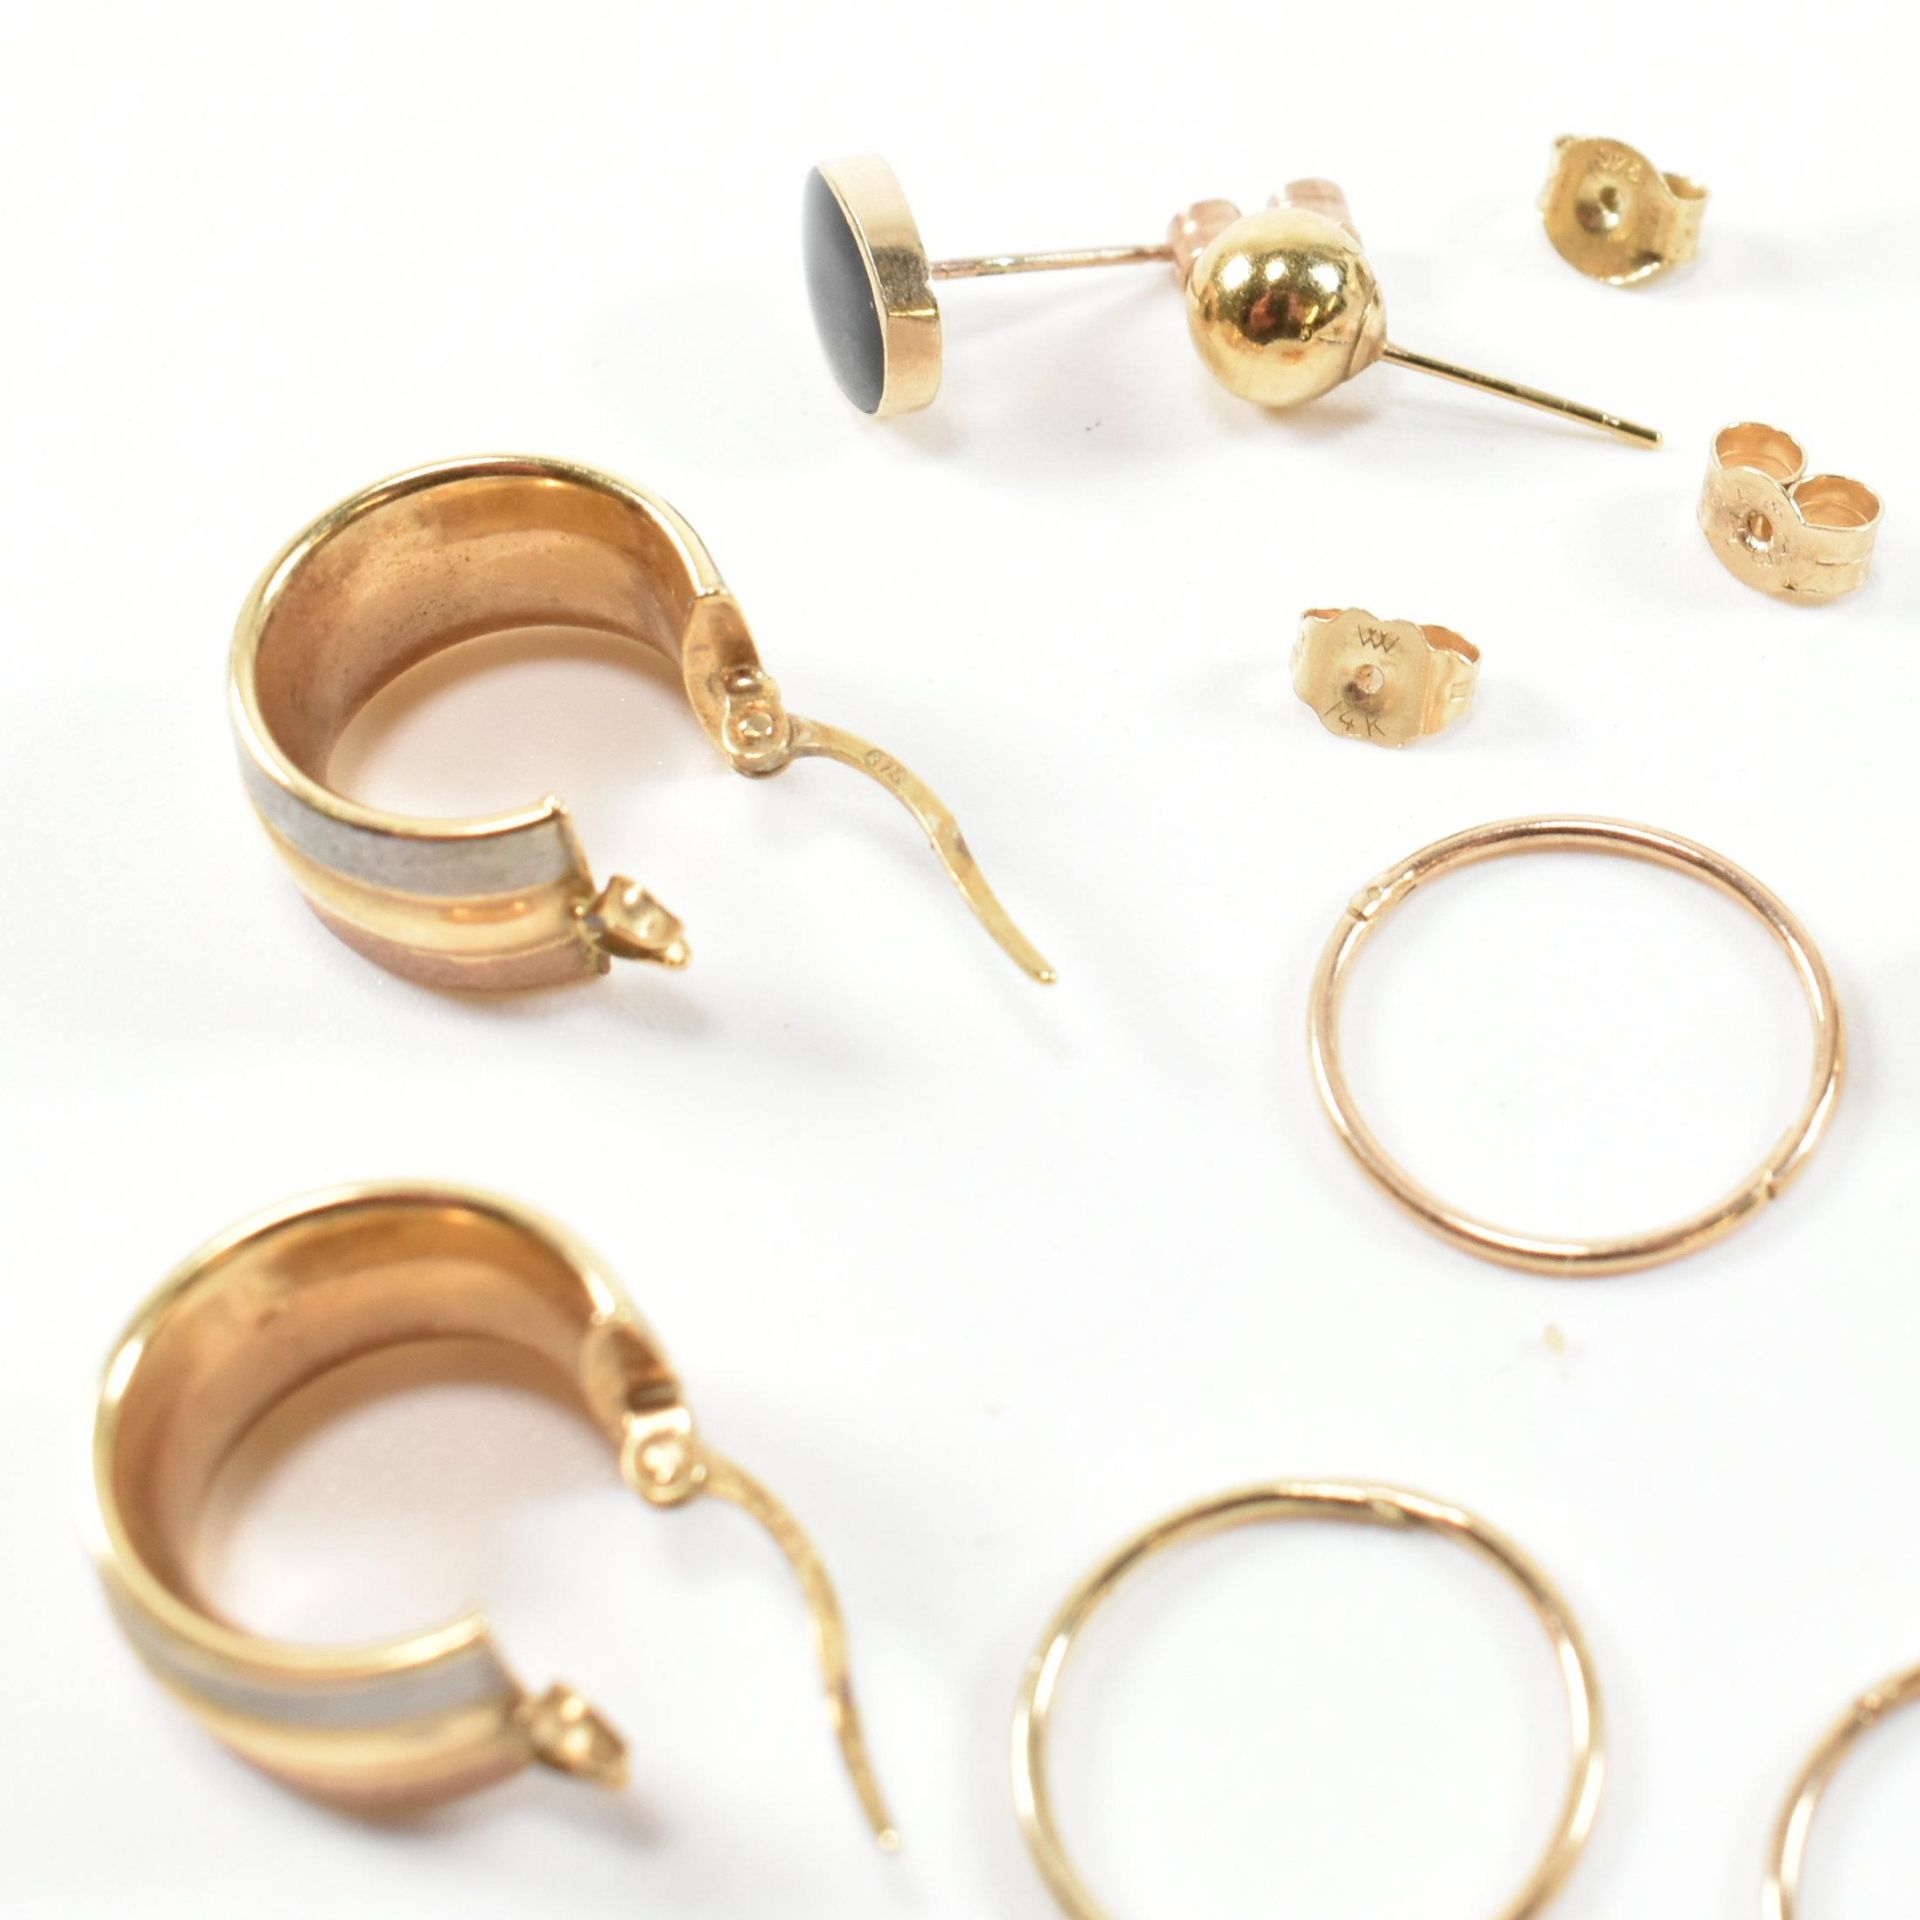 COLLECTION OF 9CT GOLD HOOP & STUD EARRINGS - Image 7 of 7